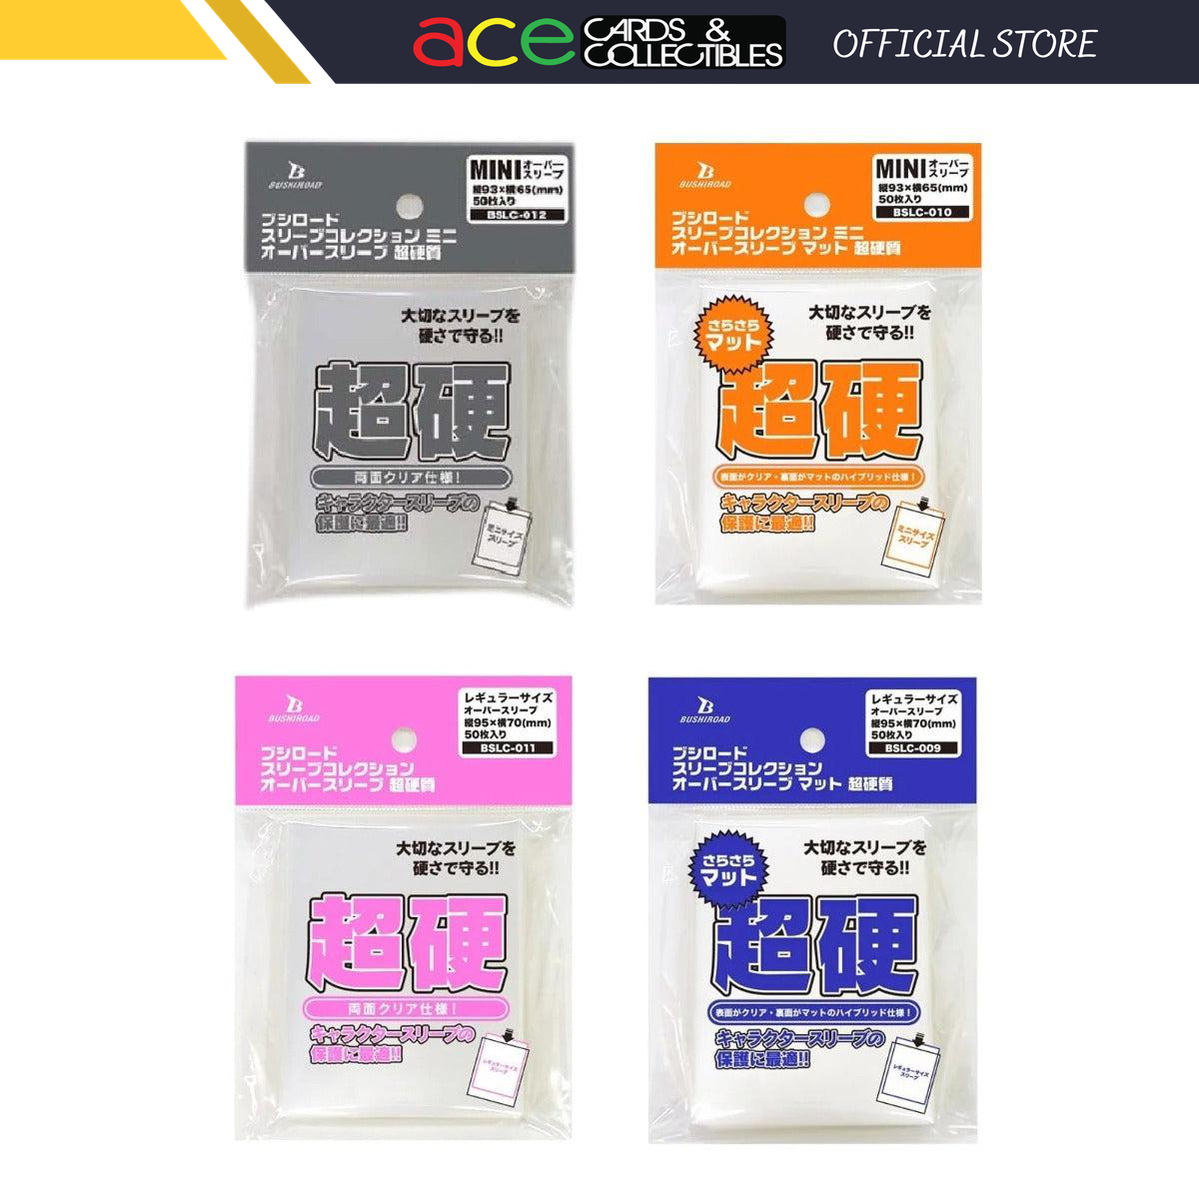 Bushiroad Sleeve Protector Super Hard Over Sleeve [BSLC-009, BSLC-010, BSLC-011, BSLC-012]-Standard (Matte & Clear)-Bushiroad-Ace Cards & Collectibles